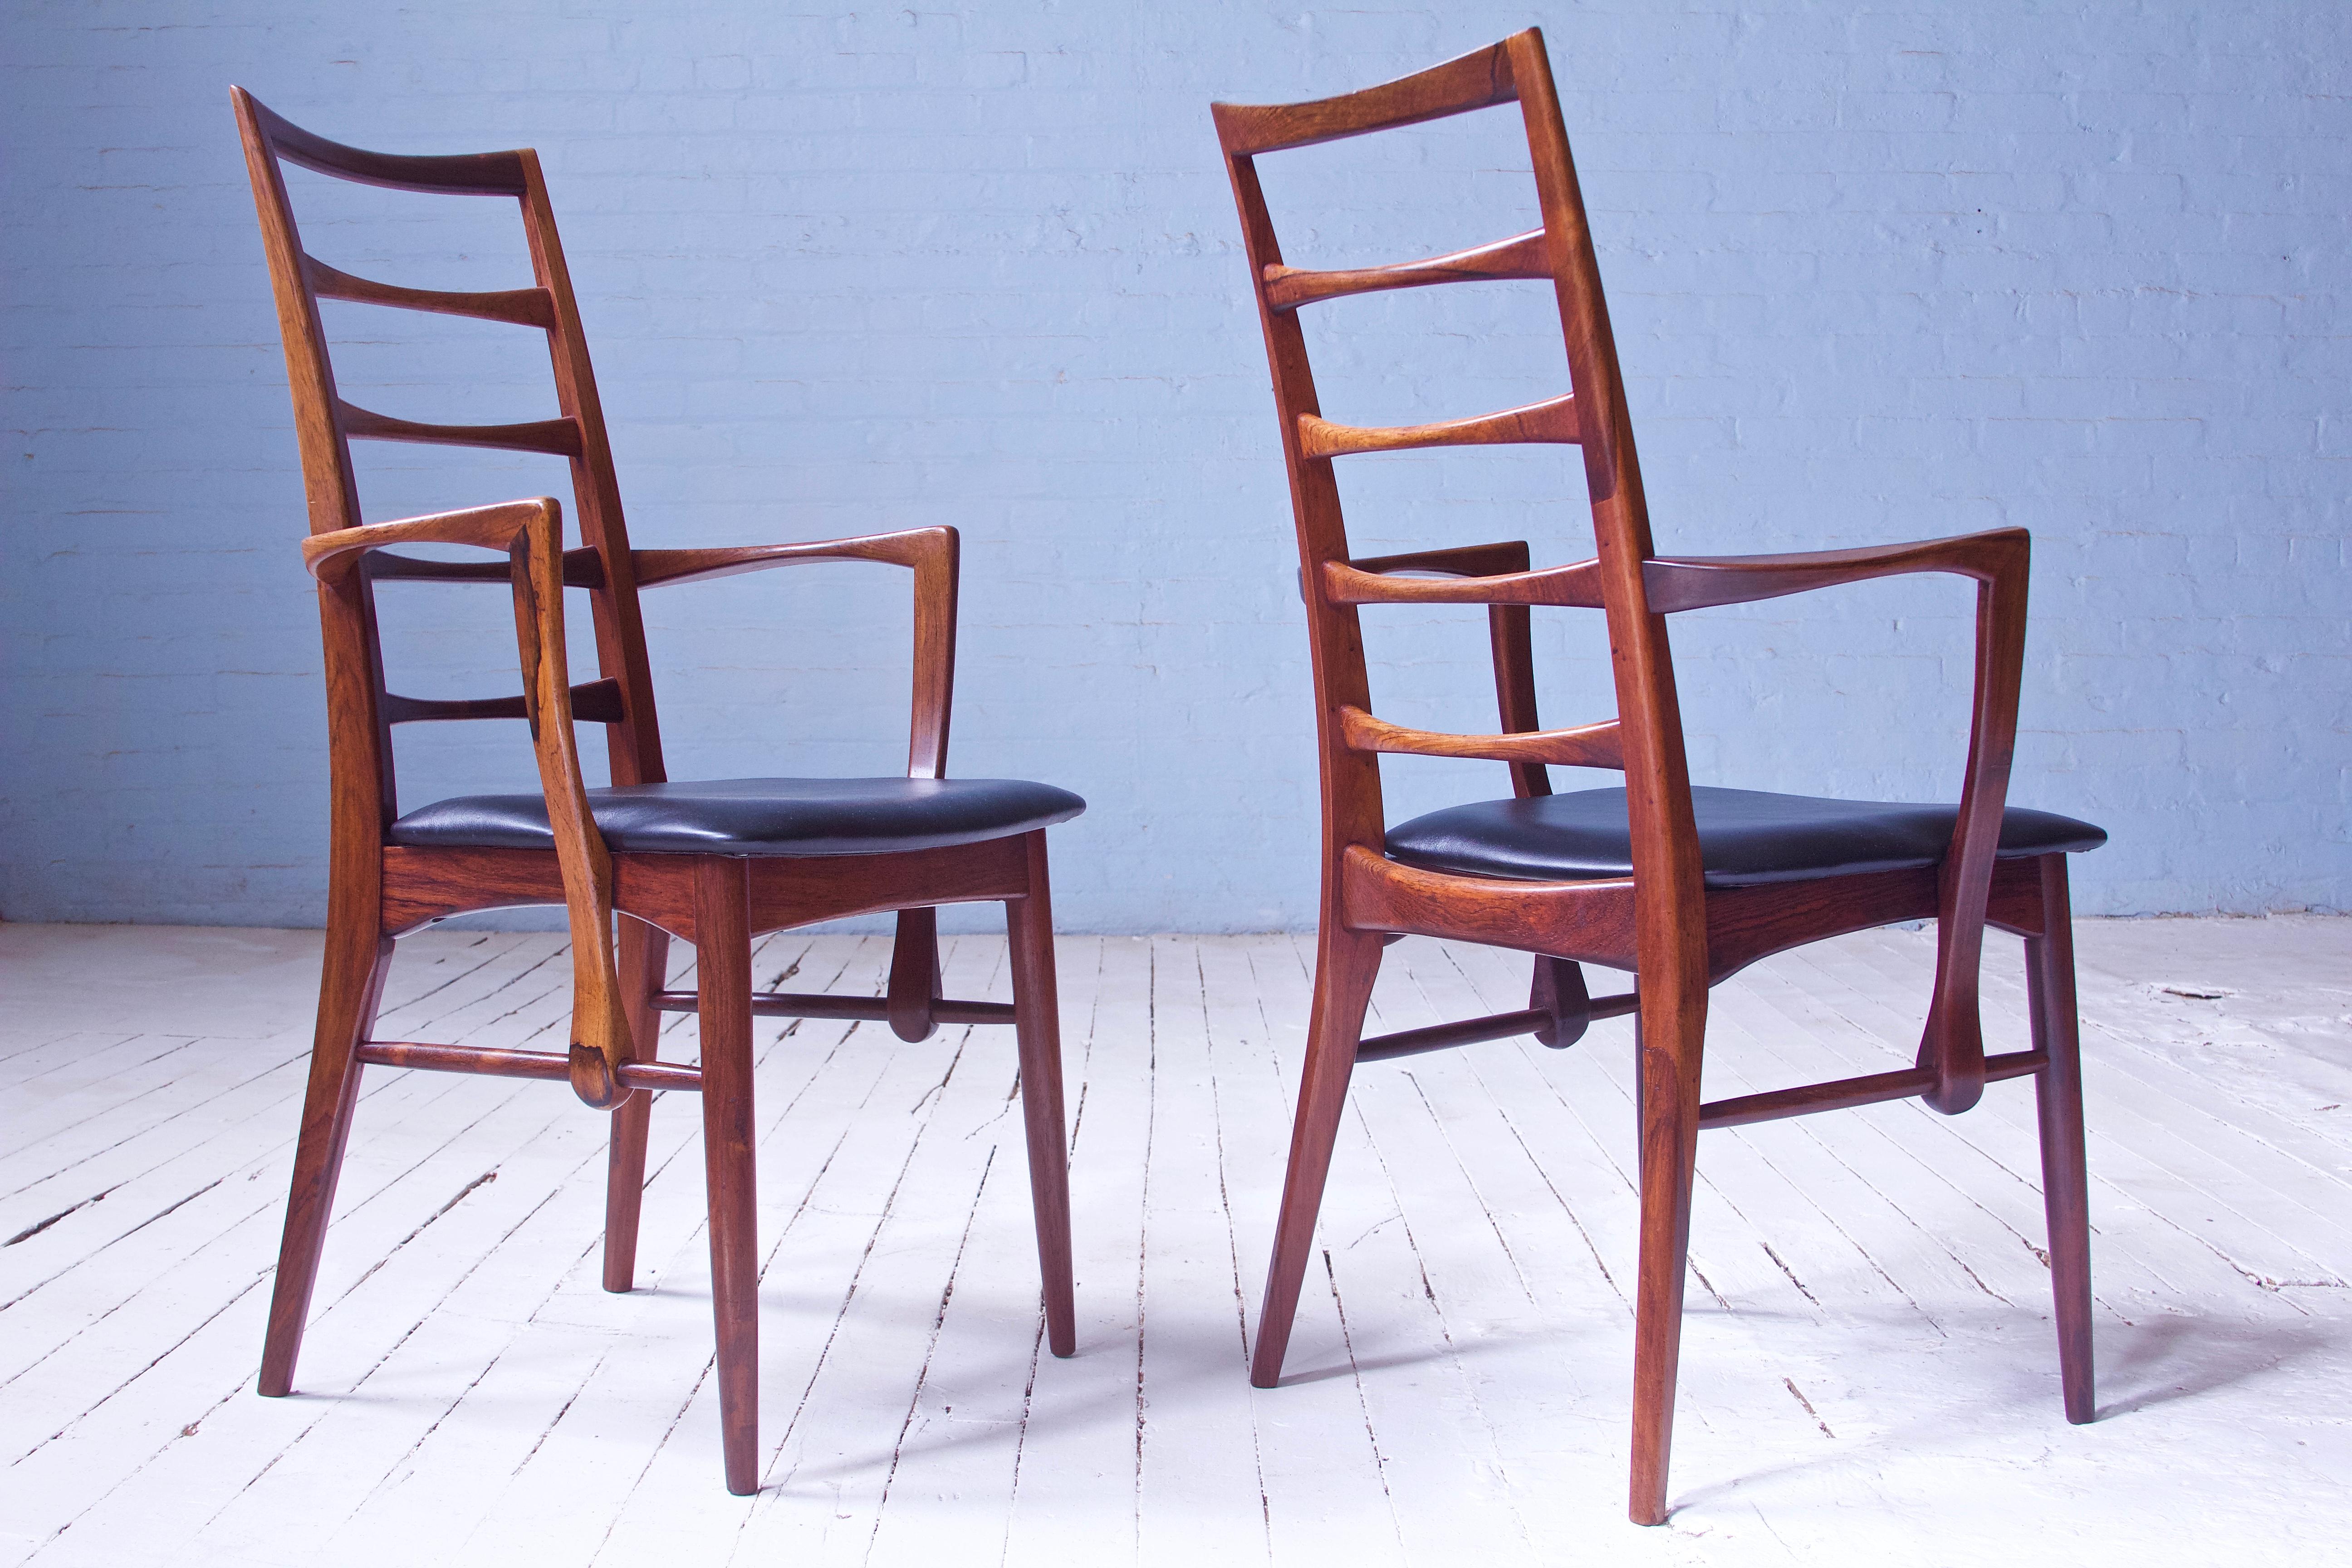 An awesome pair of the supremely elegant 'lis' armchairs in richly figured tropical hardwood and black leather. These frames feature a ladder back stile arrangement borrowed from various vernacular Windsor forms; here however the stiles are